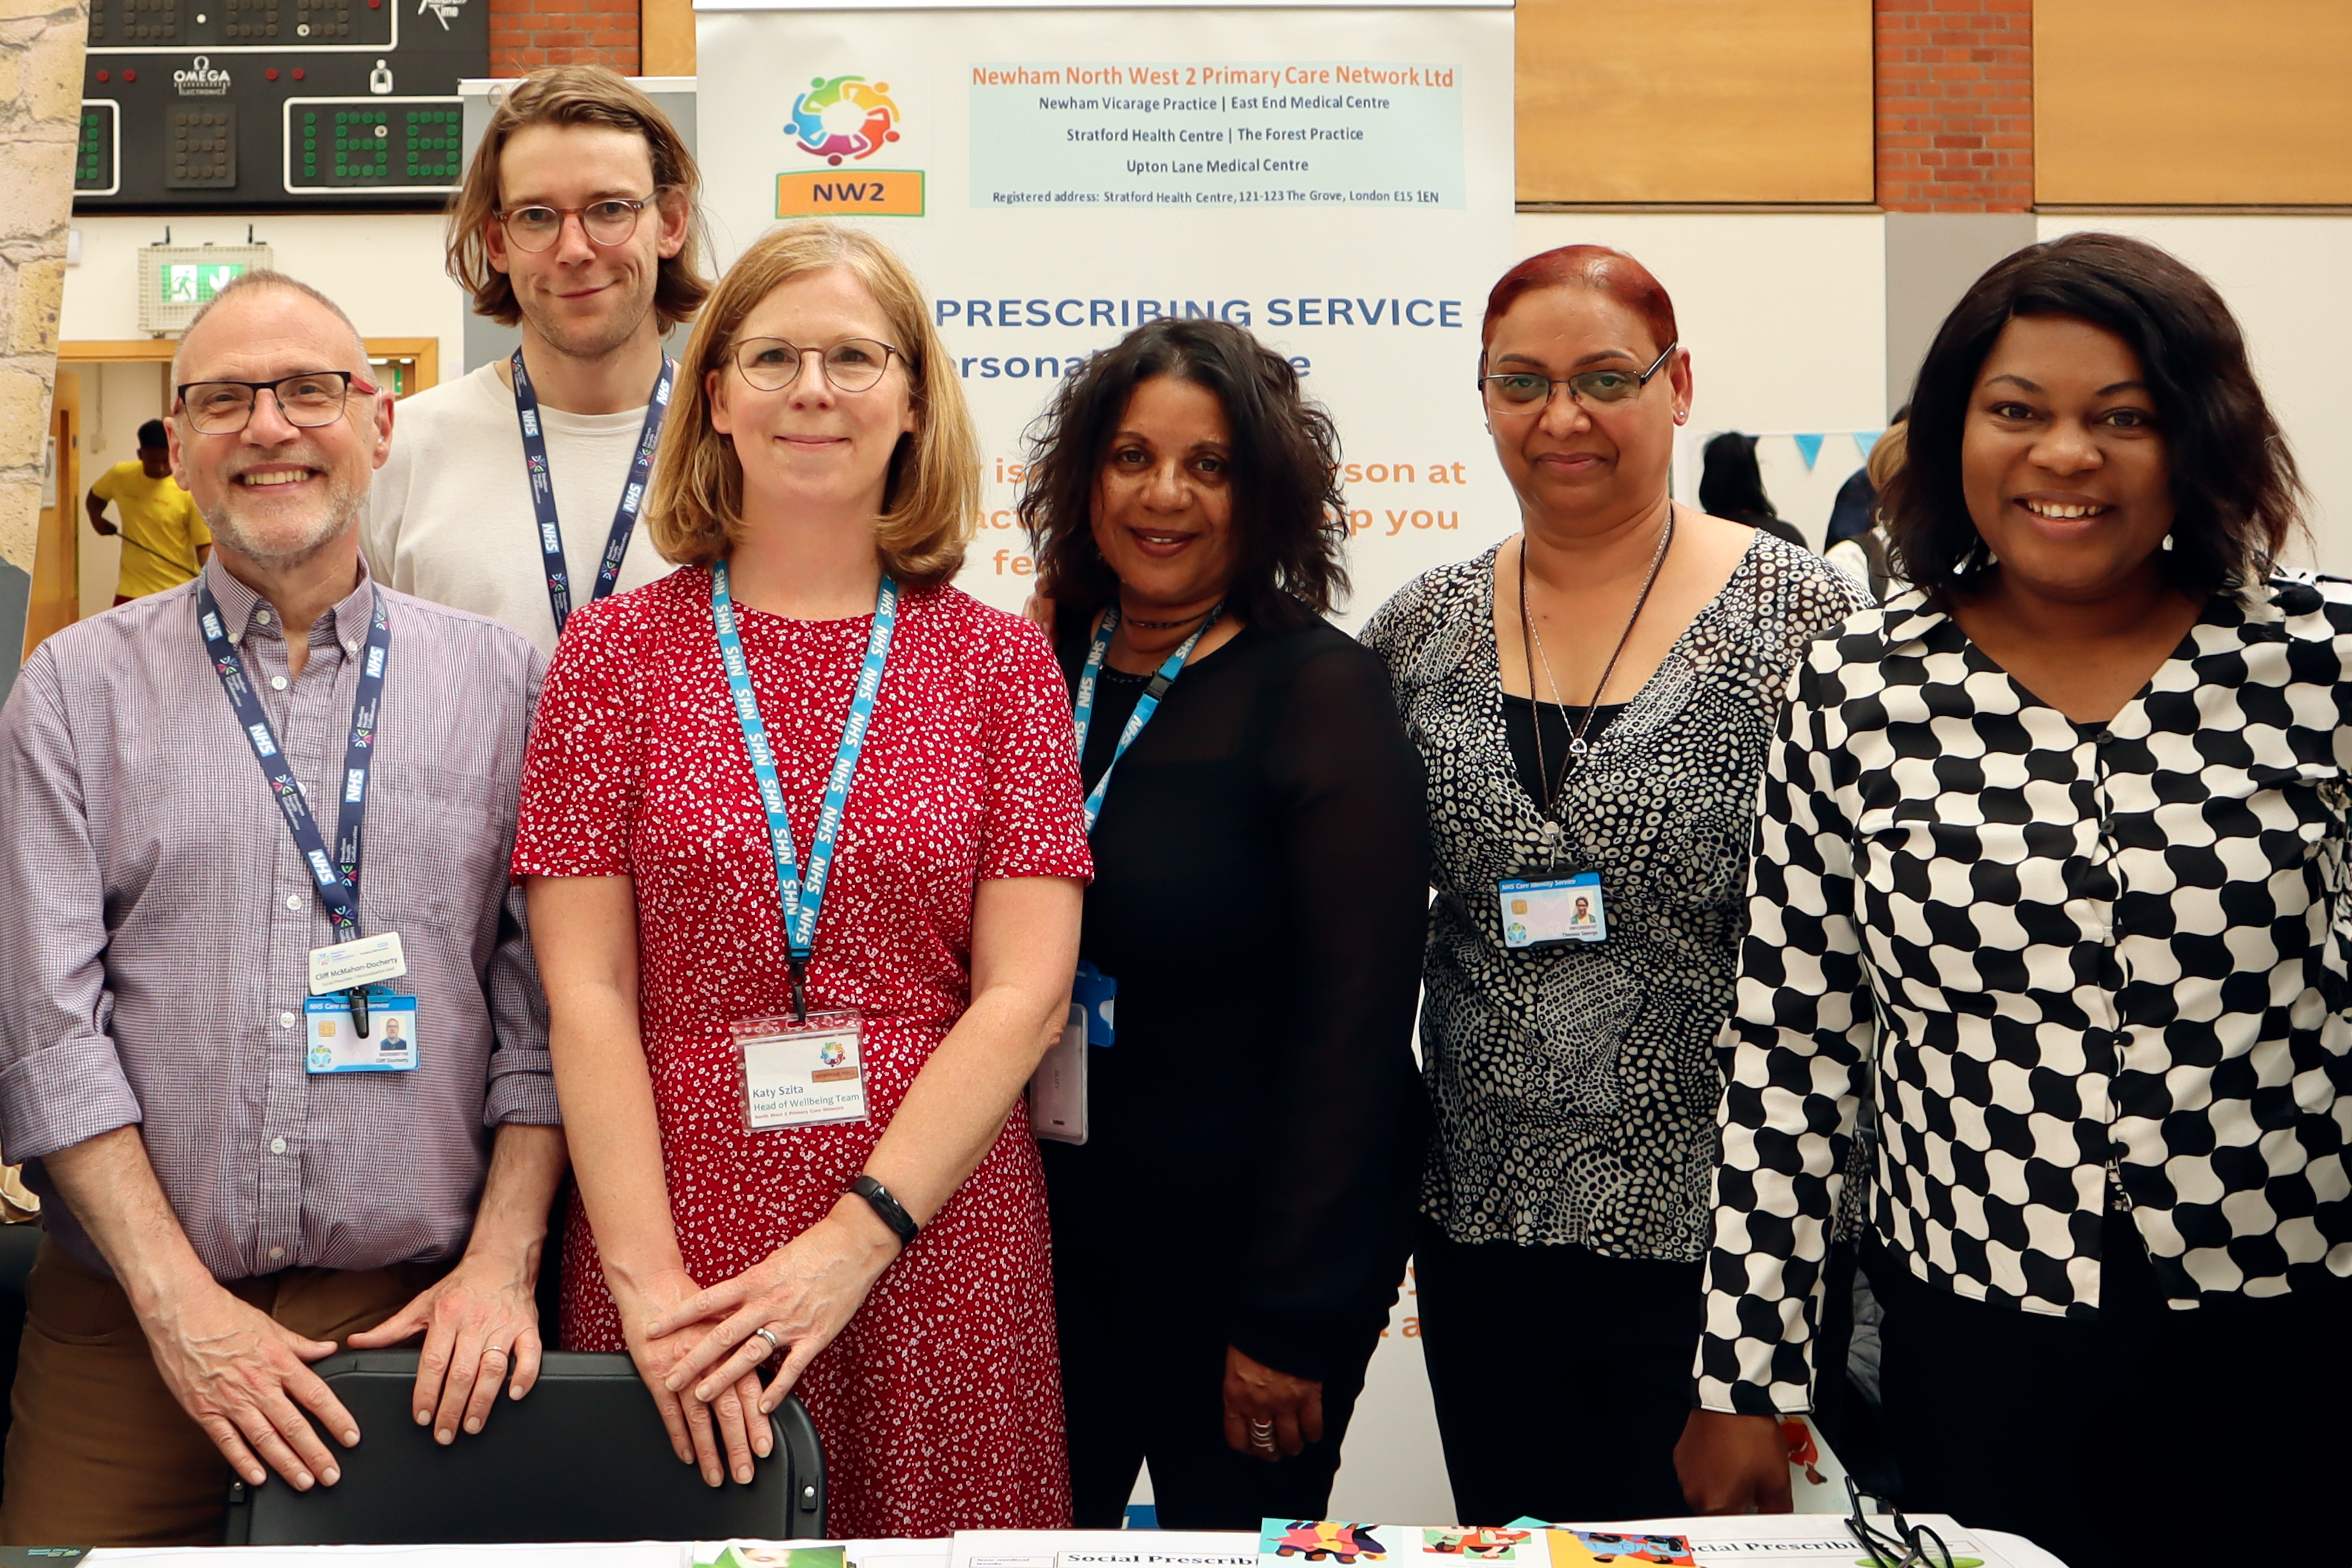 A group of social prescribers at a stall at a community event smilling together